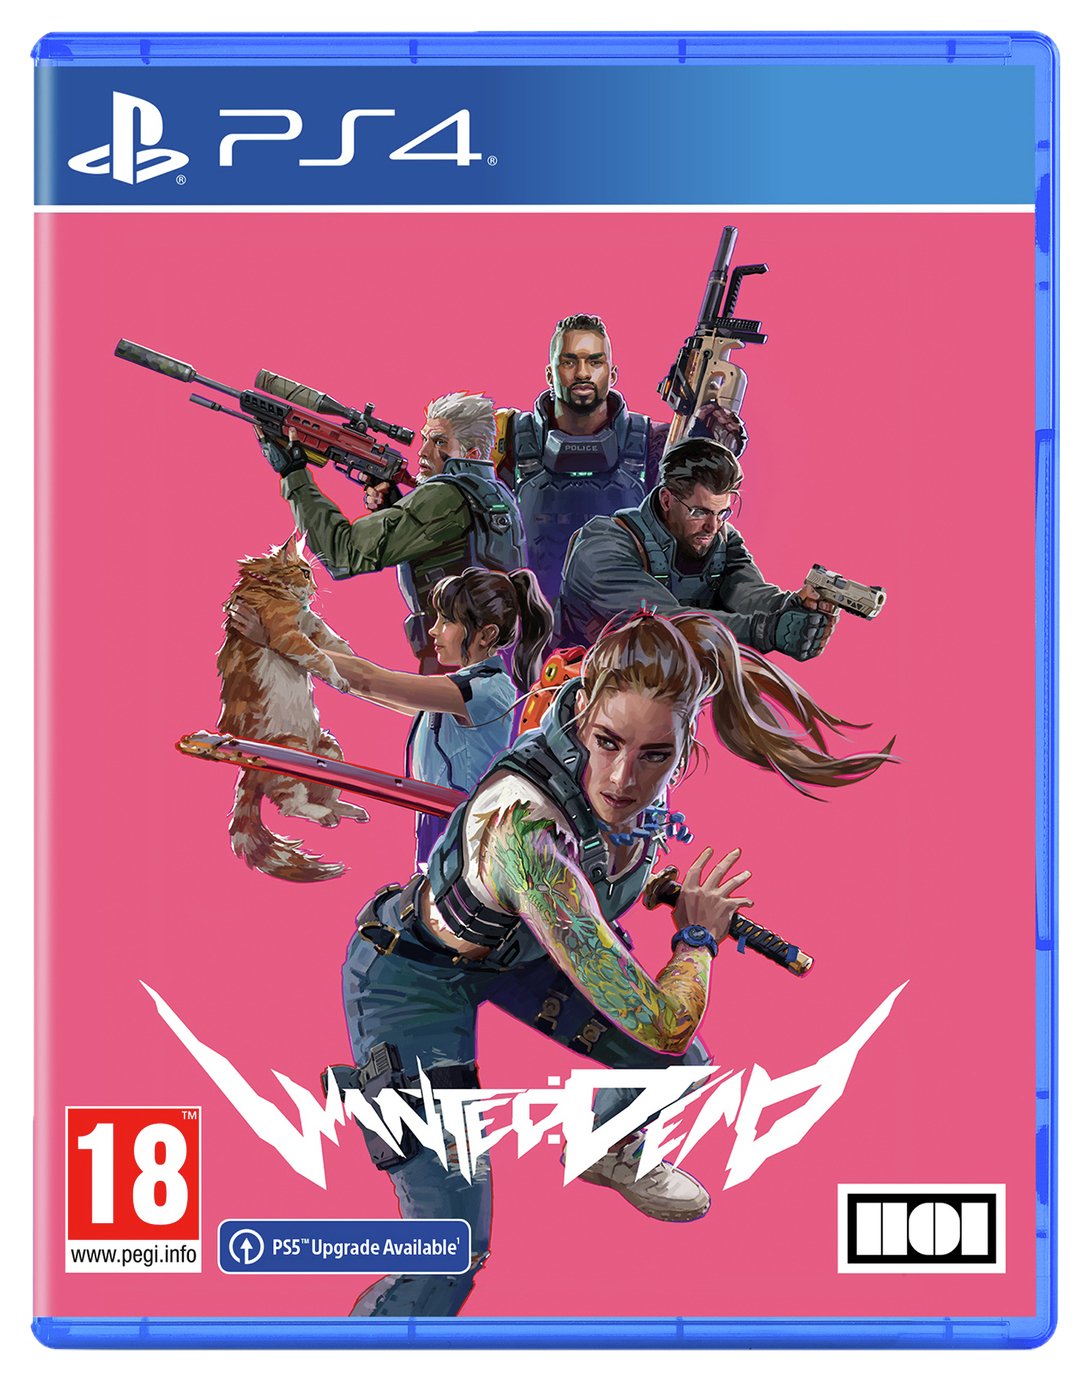 Wanted: Dead PS4 Game